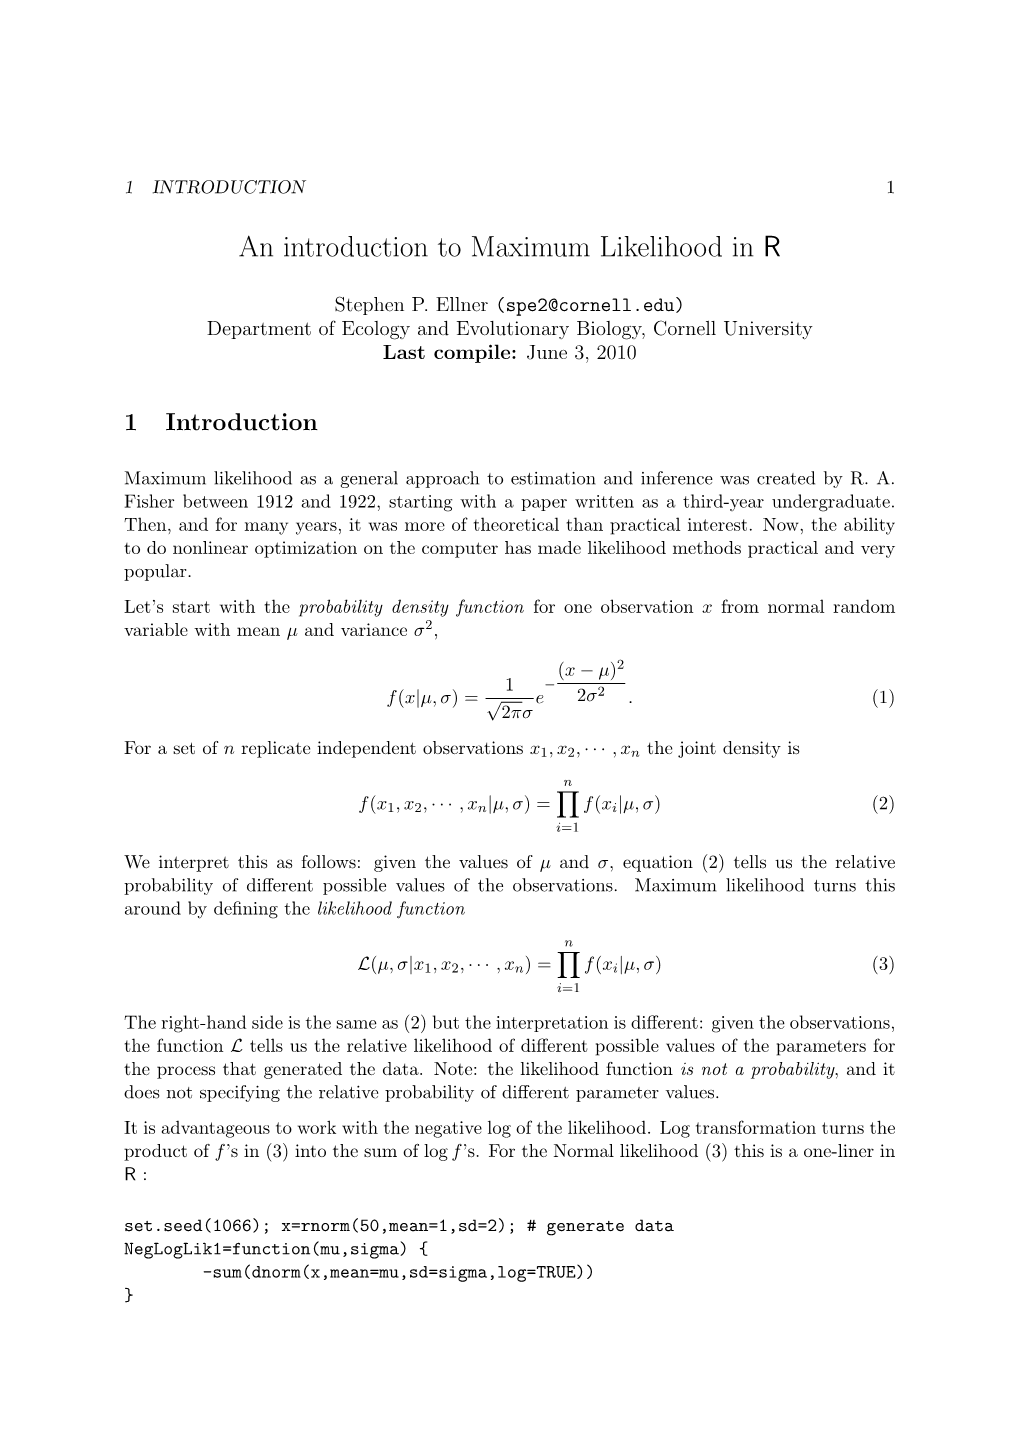 An Introduction to Maximum Likelihood in R